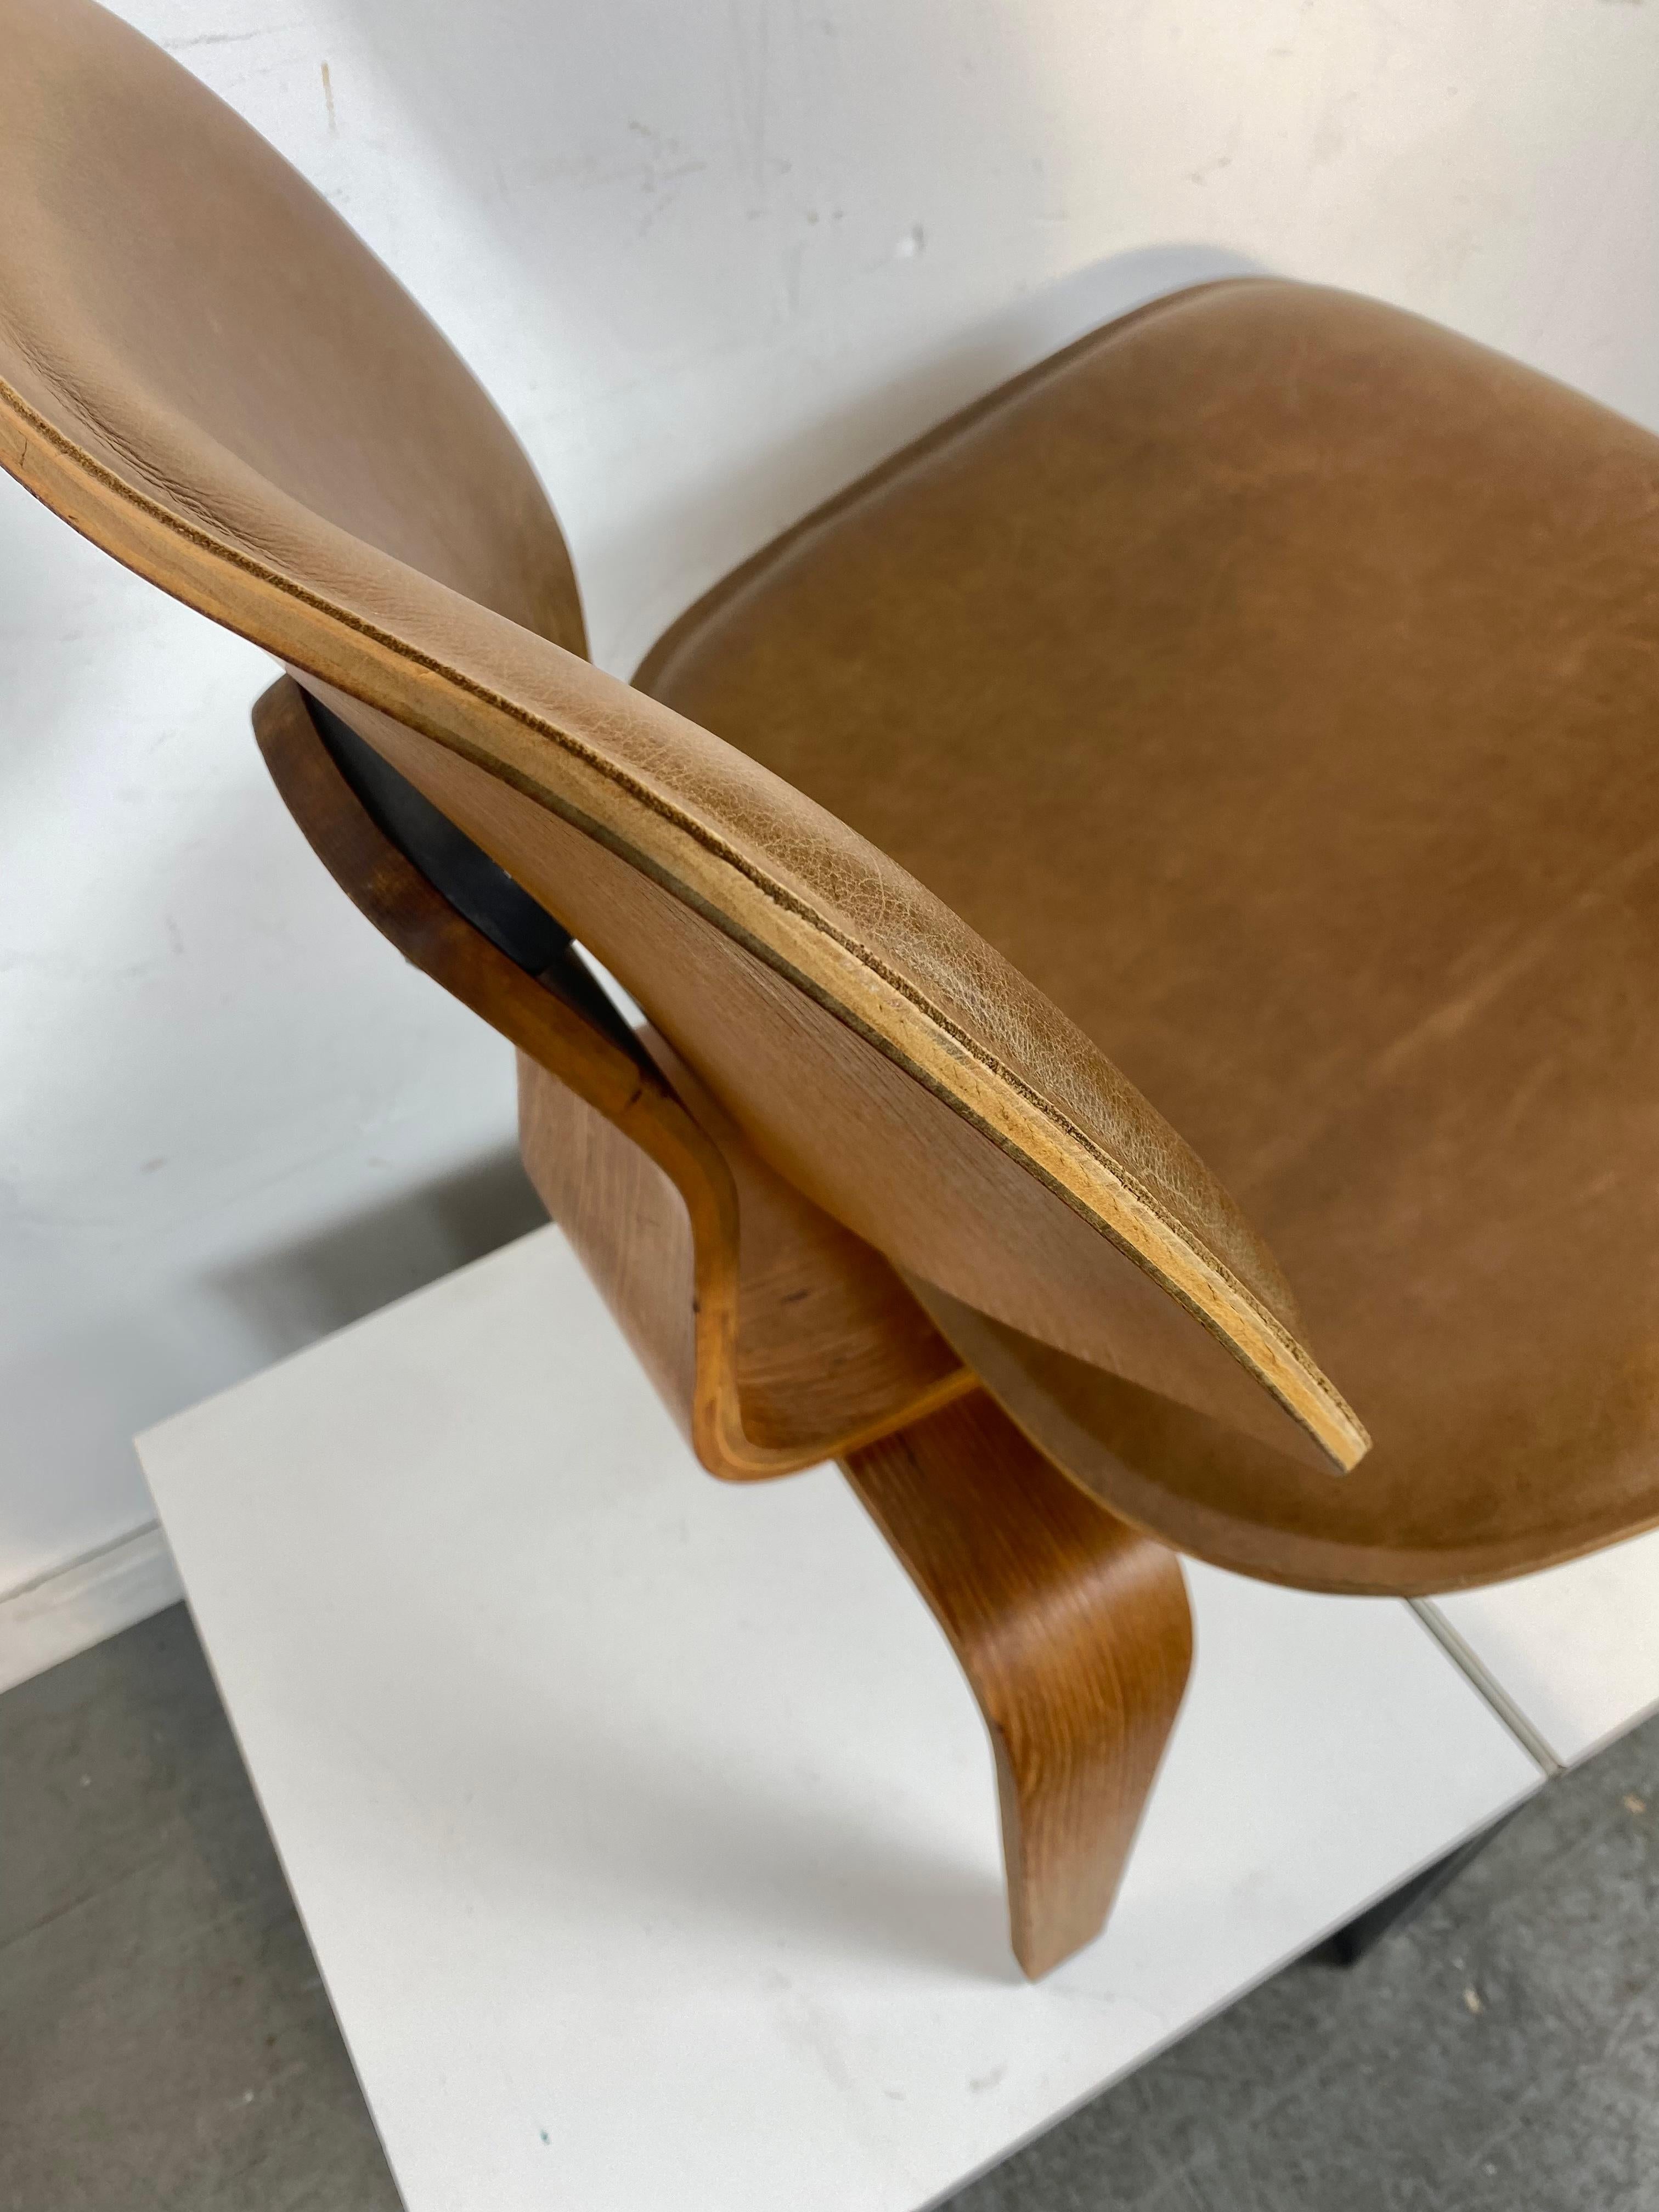 American Charles Eames L C W (LOUNGE CHAIR) Leather seat and back, Modernist Herman Miller